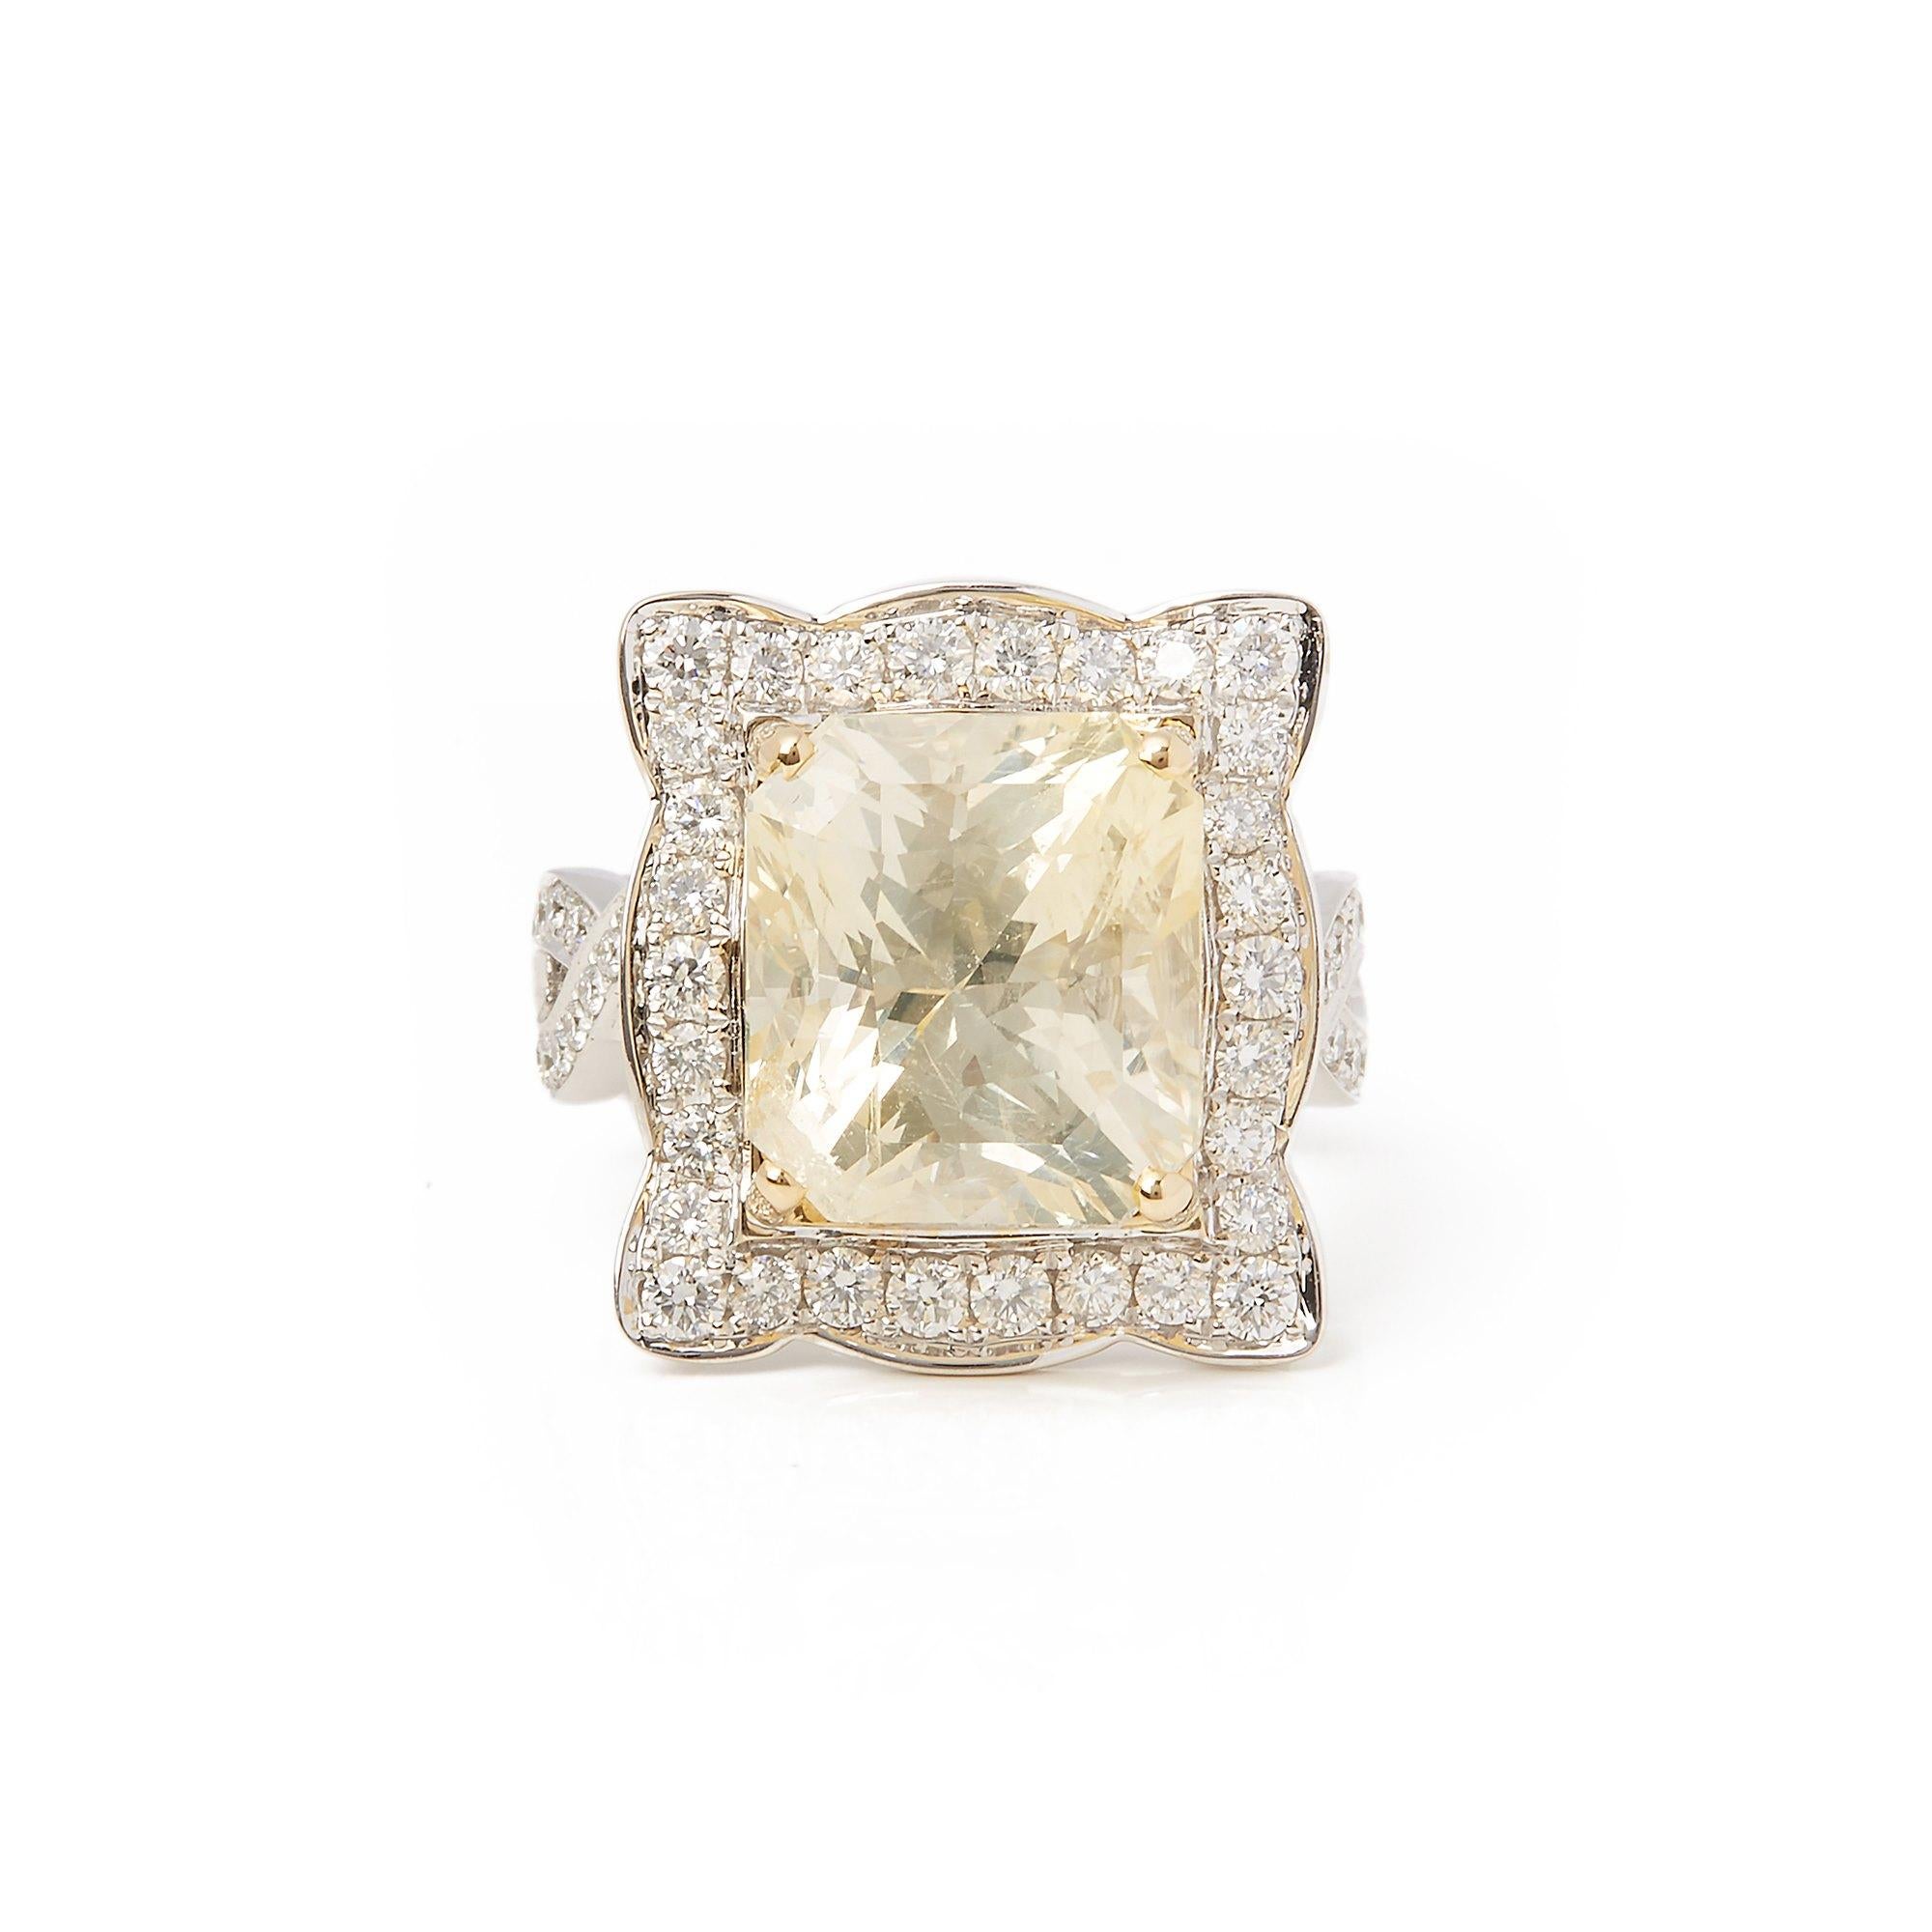 This ring designed by David Jerome is from his private collection and features one cushion cut yellow Sapphire sourced in Sri Lanka. Totalling 12.19cts set with round brilliant cut Diamonds totalling 1.24cts. Mounted in an 18k white gold setting.